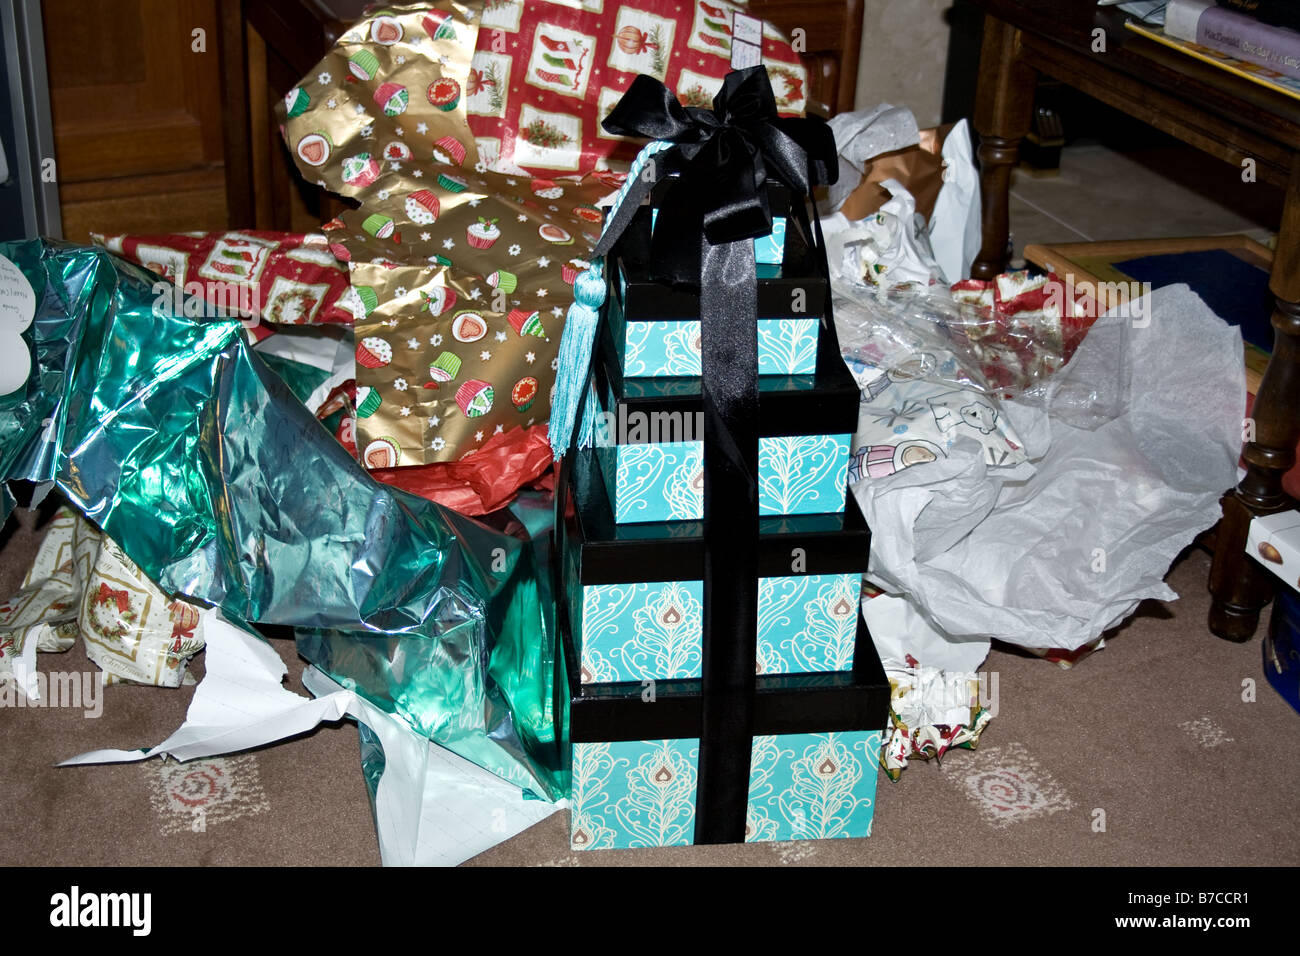 Christmas gift boxes in a stack in front of wrapping paper from opened presents Stock Photo